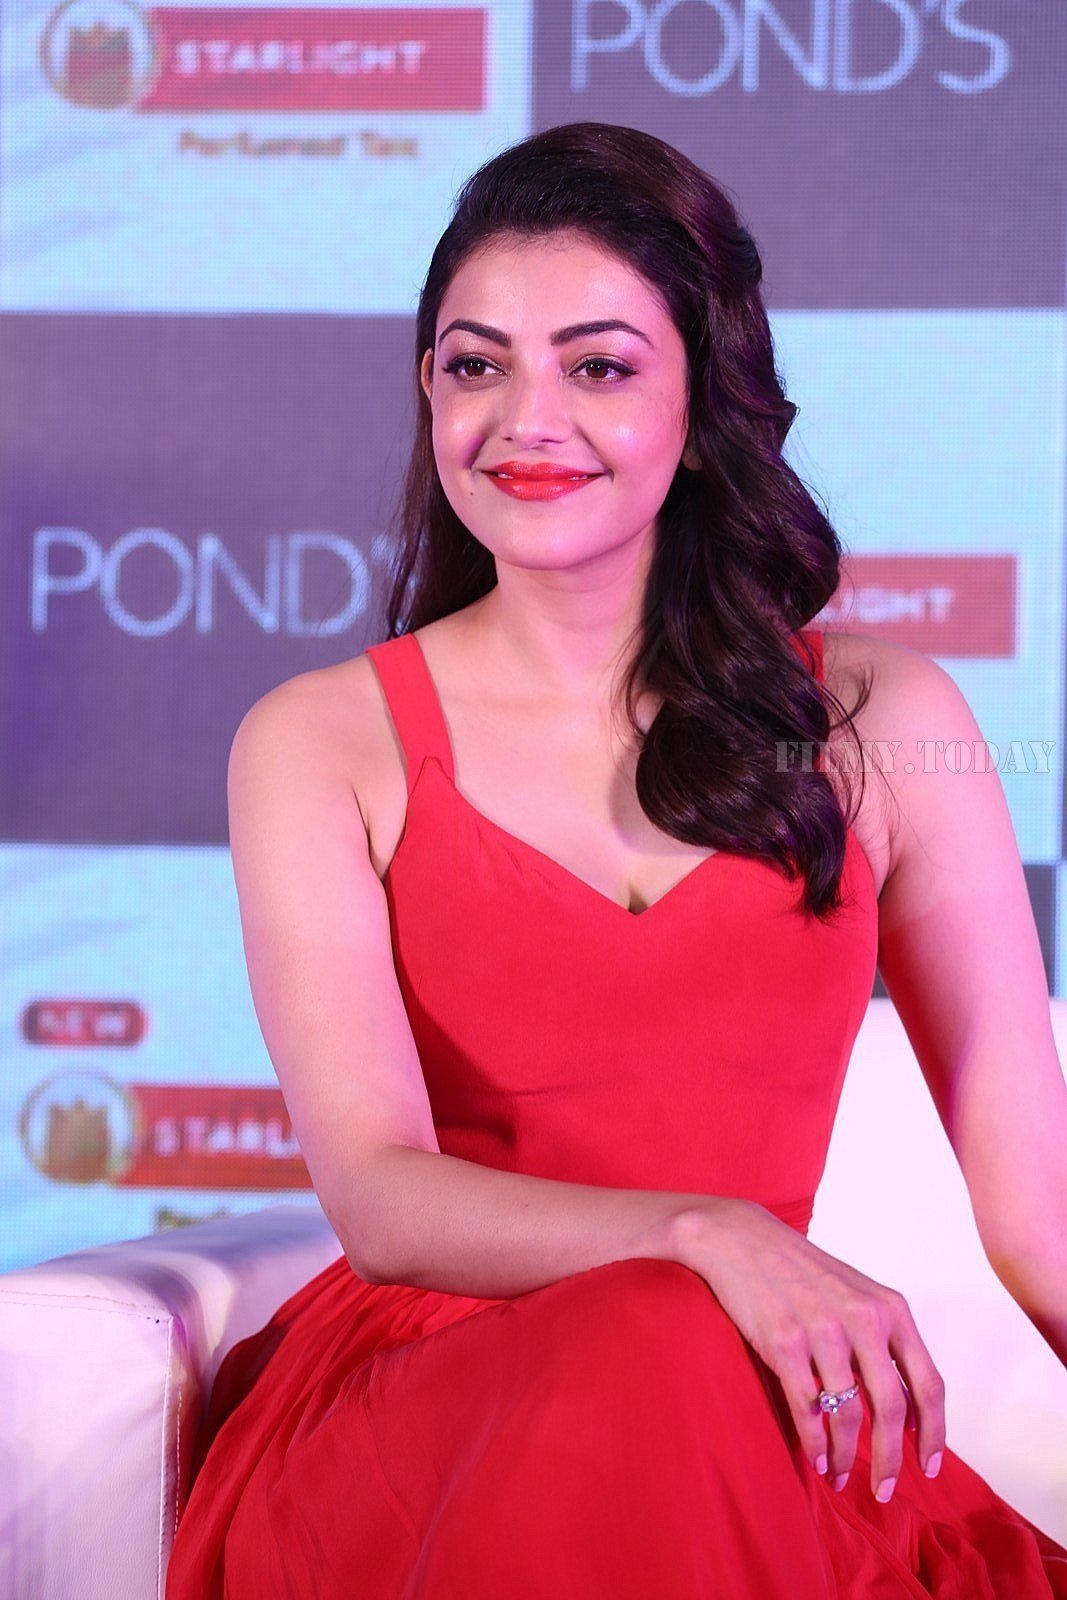 Photos: Kajal Agarwal Launches Ponds Star Light Perfumed Talc Powder | Picture 1568024